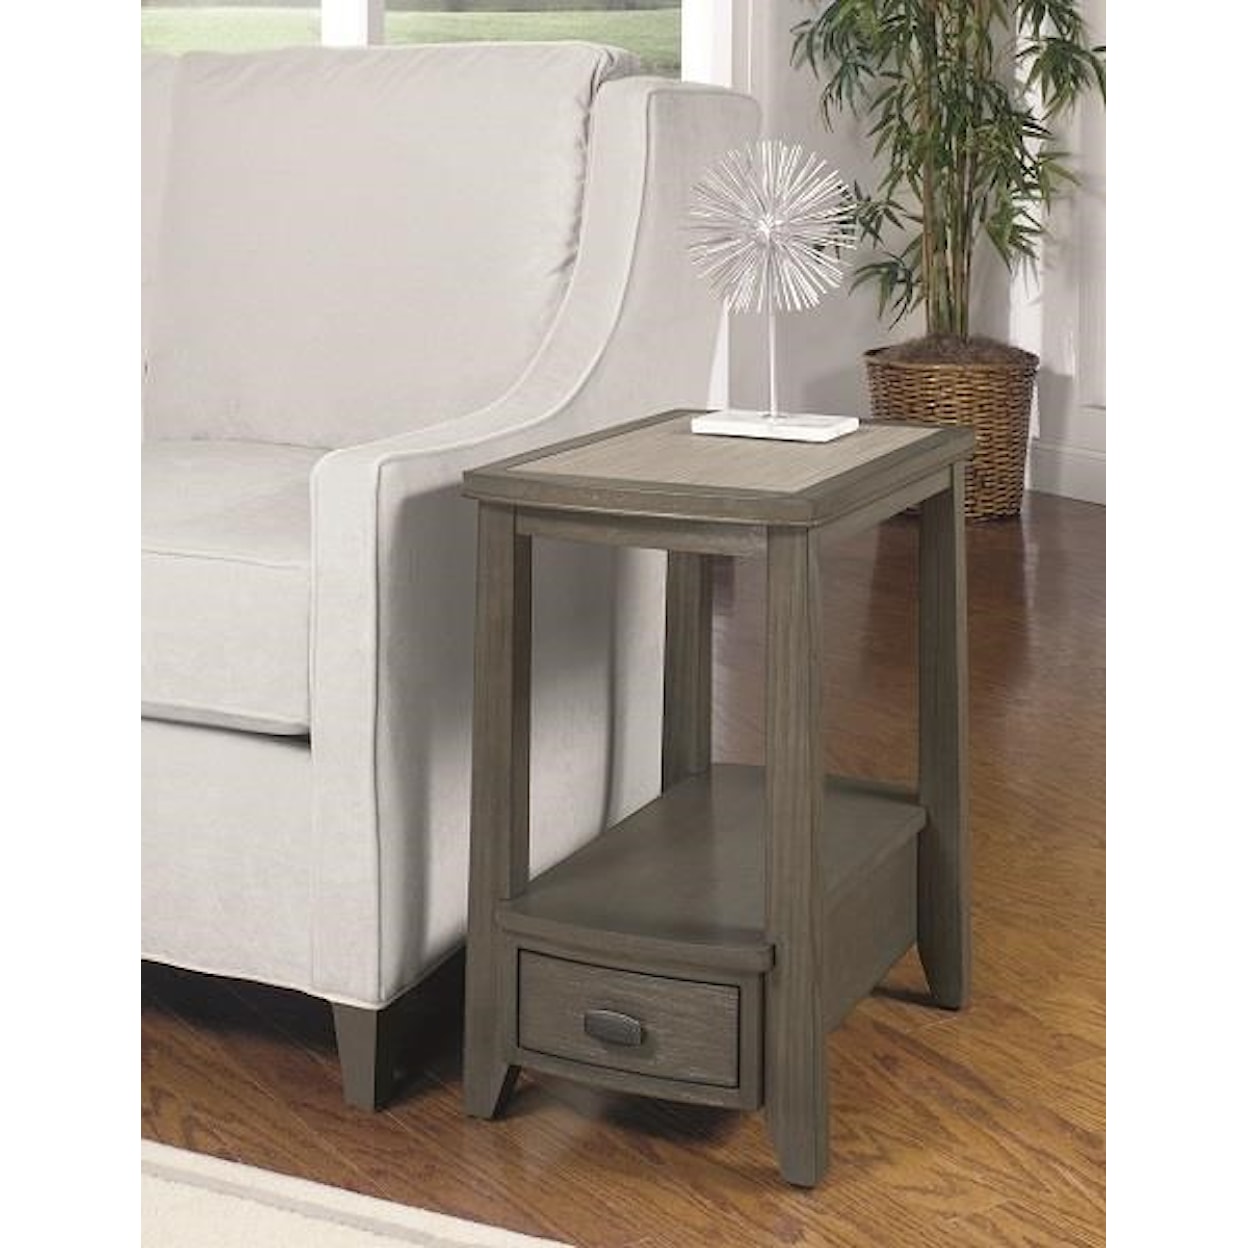 Null Furniture 2217 Chairside End Table